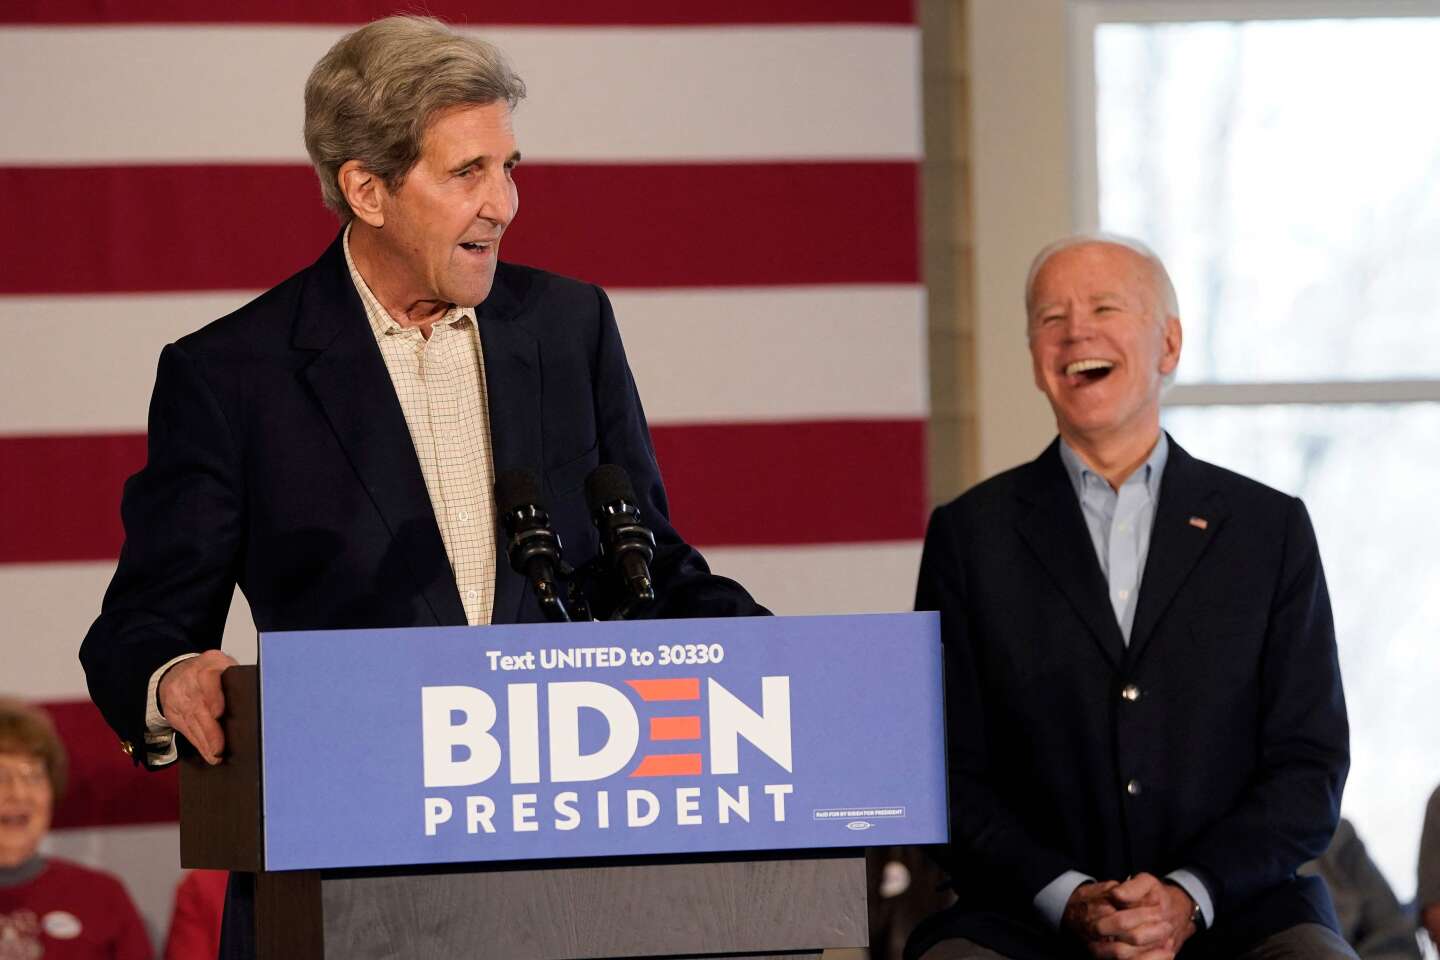 John Kerry, the US climate envoy, announced his resignation to join Joe Biden's campaign